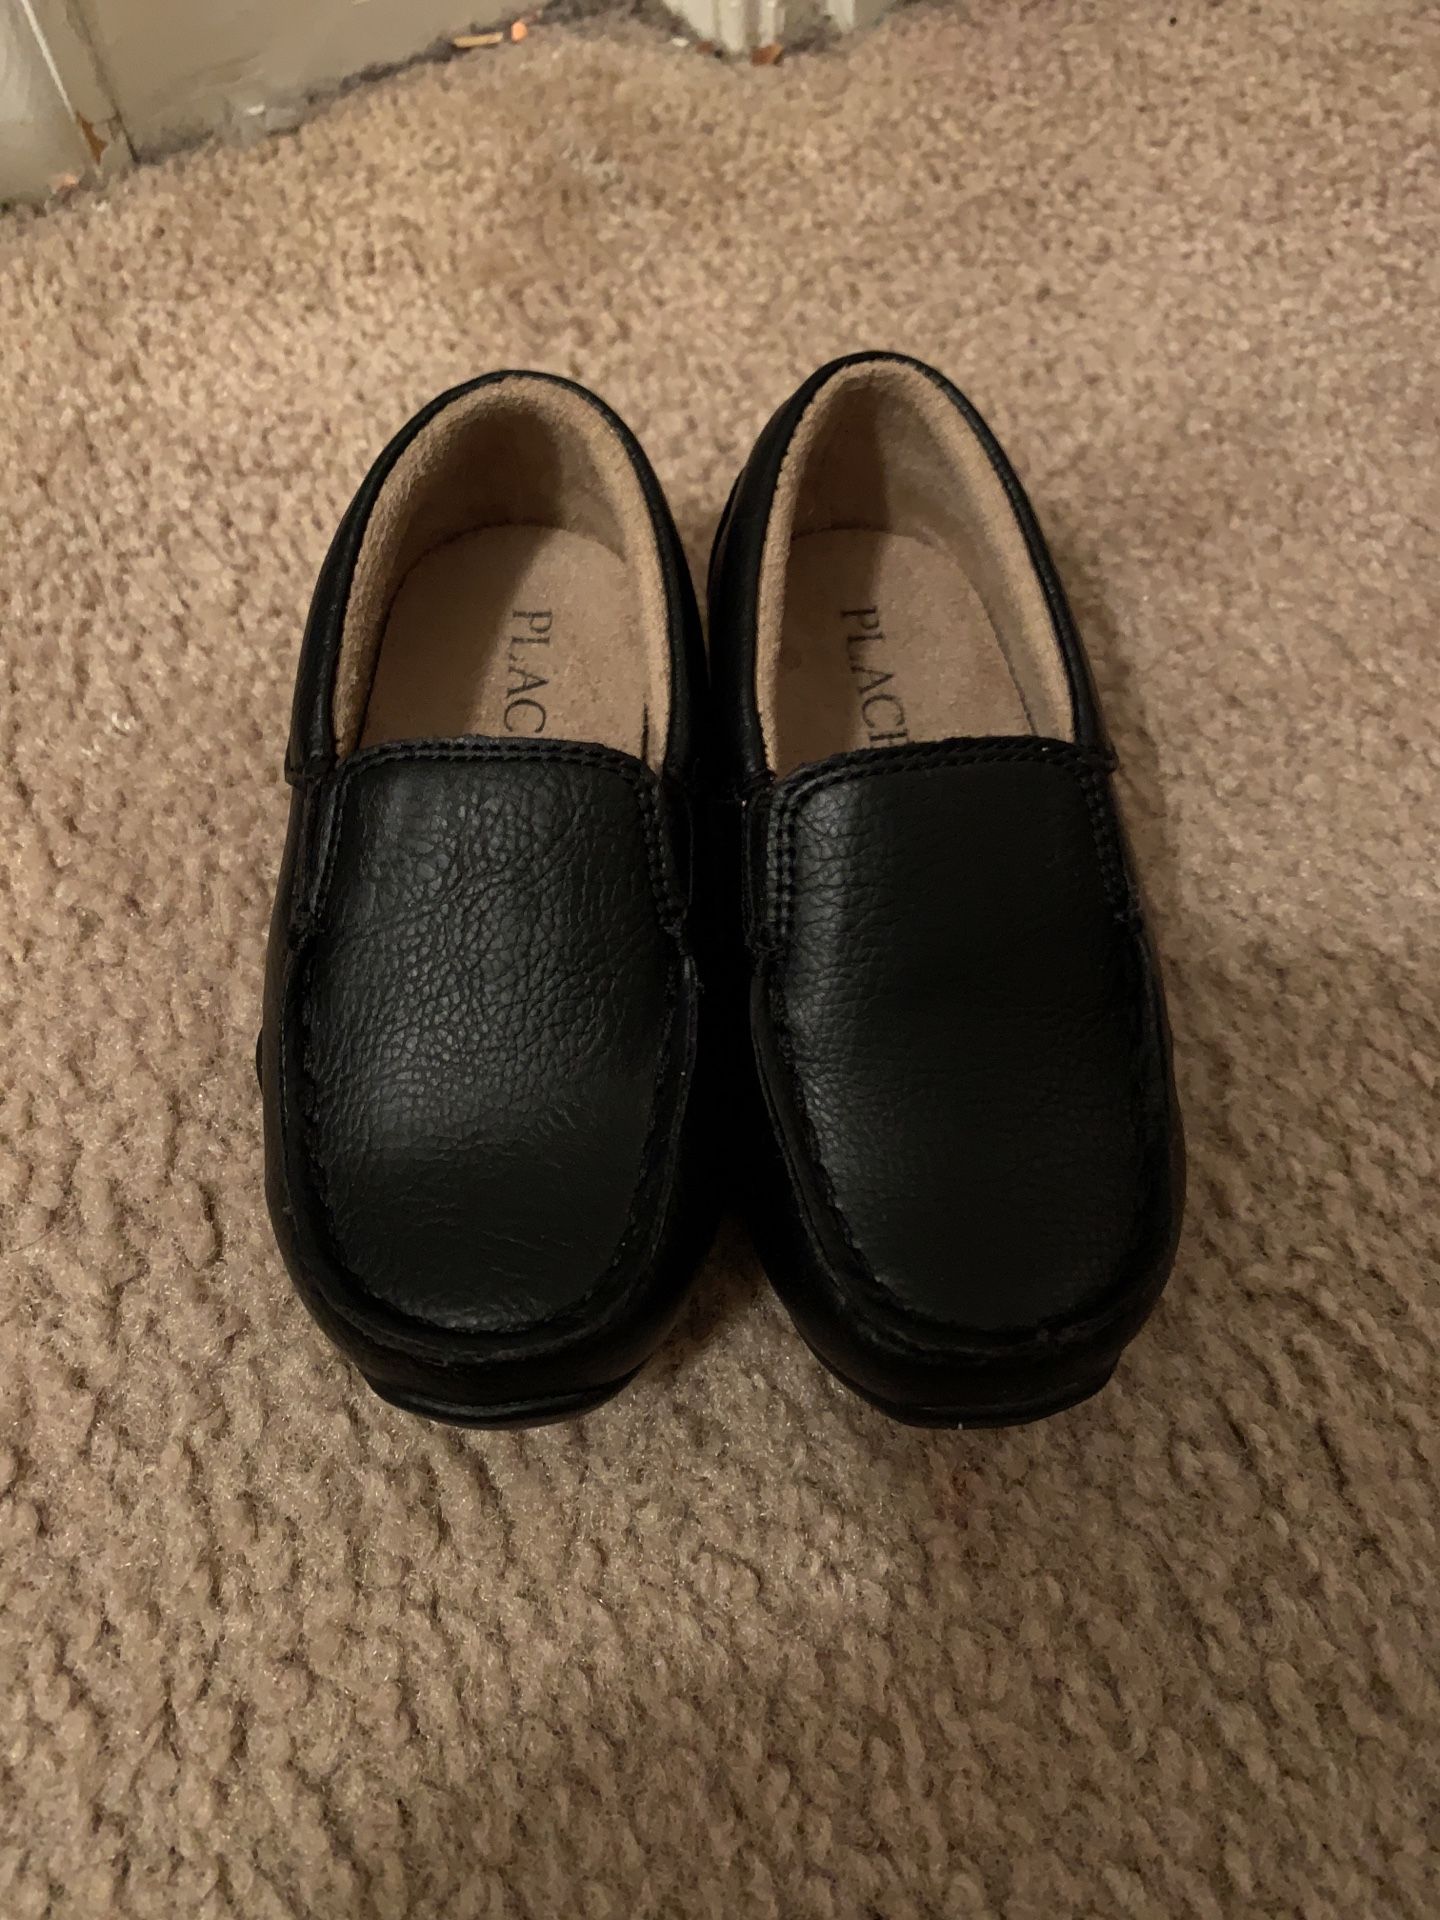 Toddler Boys Children’s Place Loafers